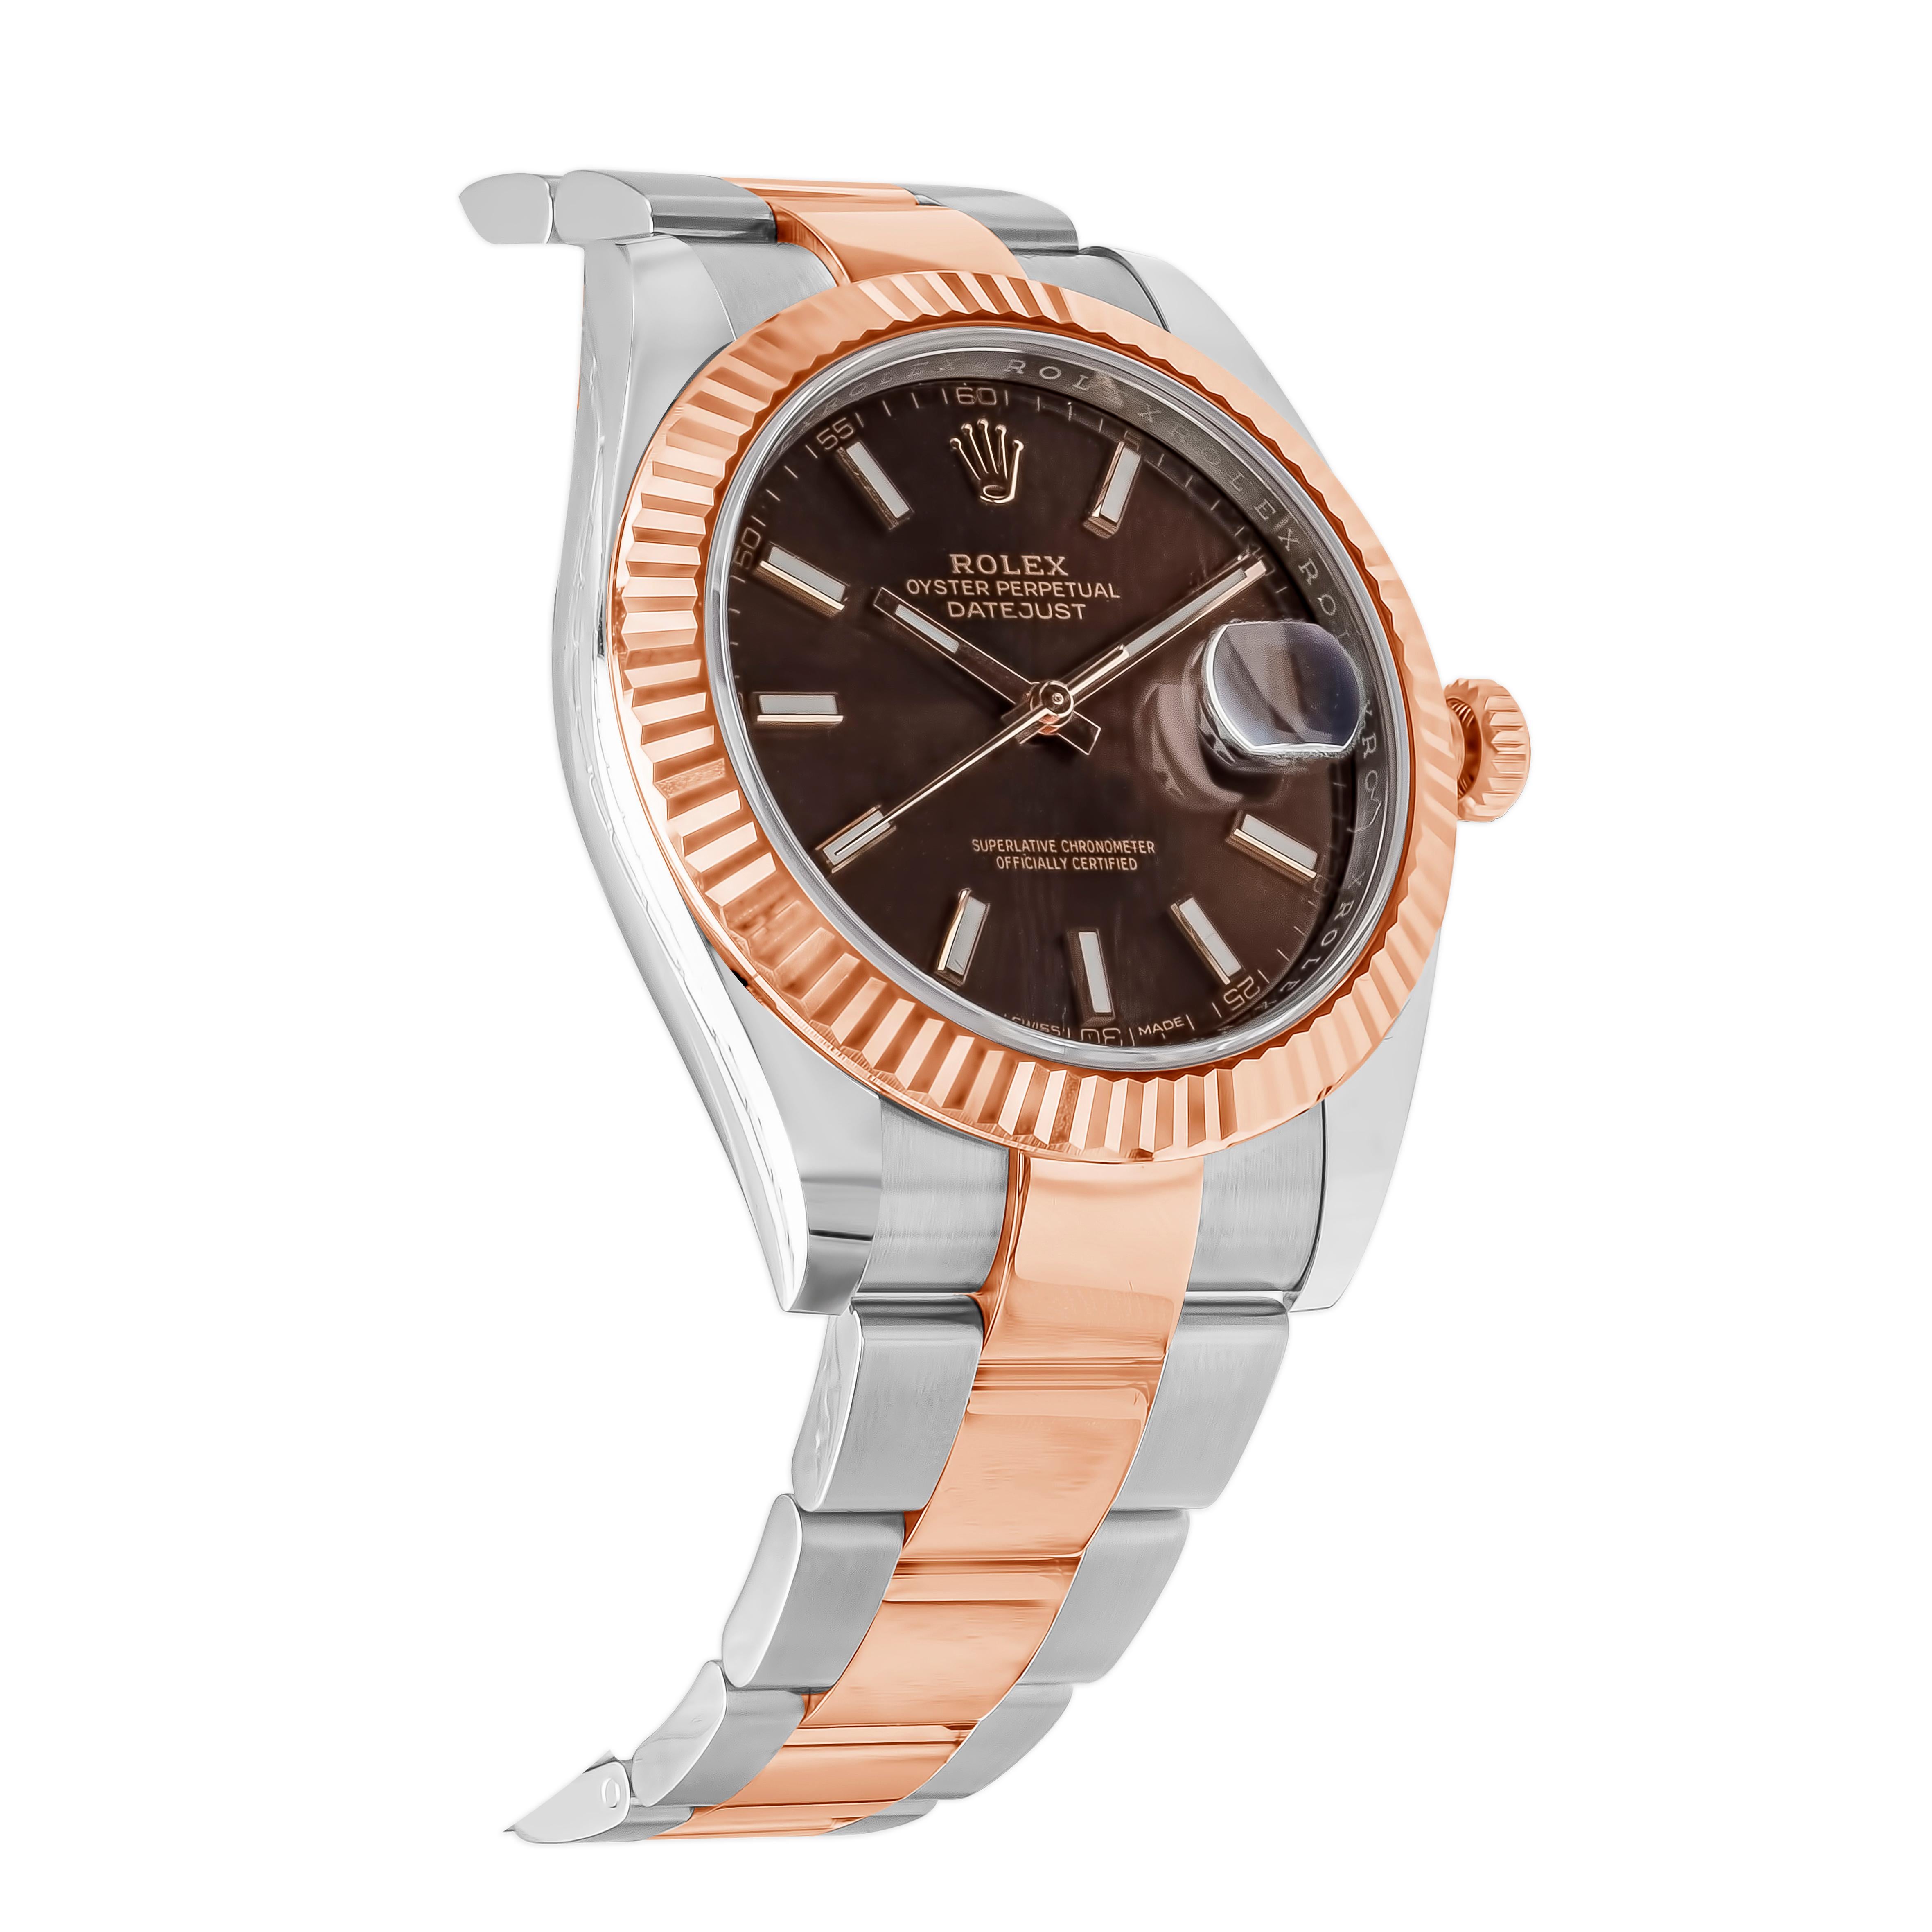 A classic model. Rolex Datejust with a 40mm stainless steel case, rose gold fluted bezel, and a chocolate brown sunburst dial. Dial set with baton hour markers and hands, date aperture on the 3 o'clock position, sapphire crystal with a cyclops